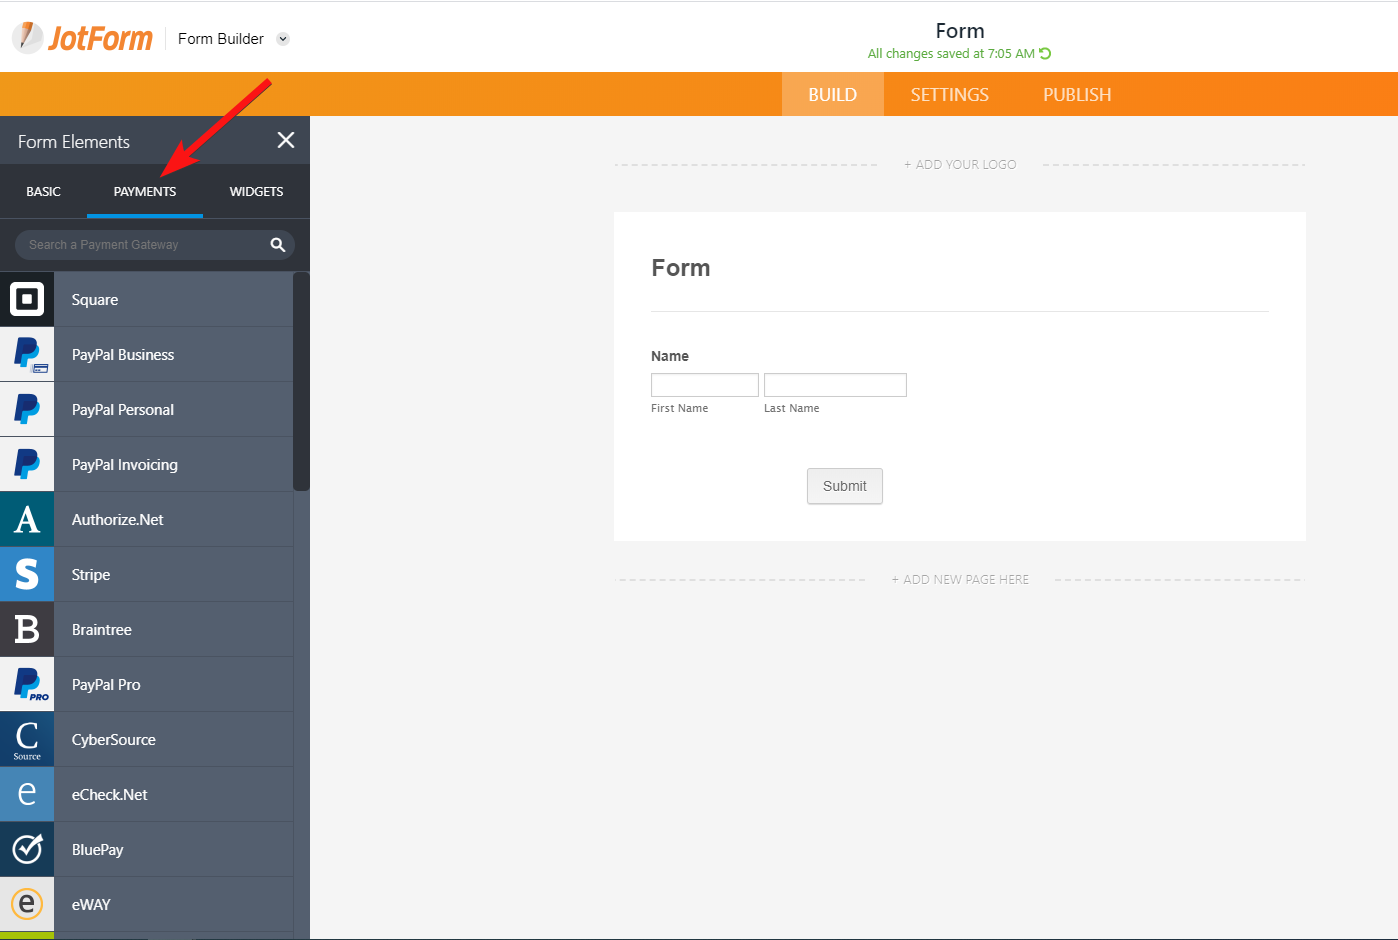 I wanted to use JotForm to collect payments from Clients Screenshot 20